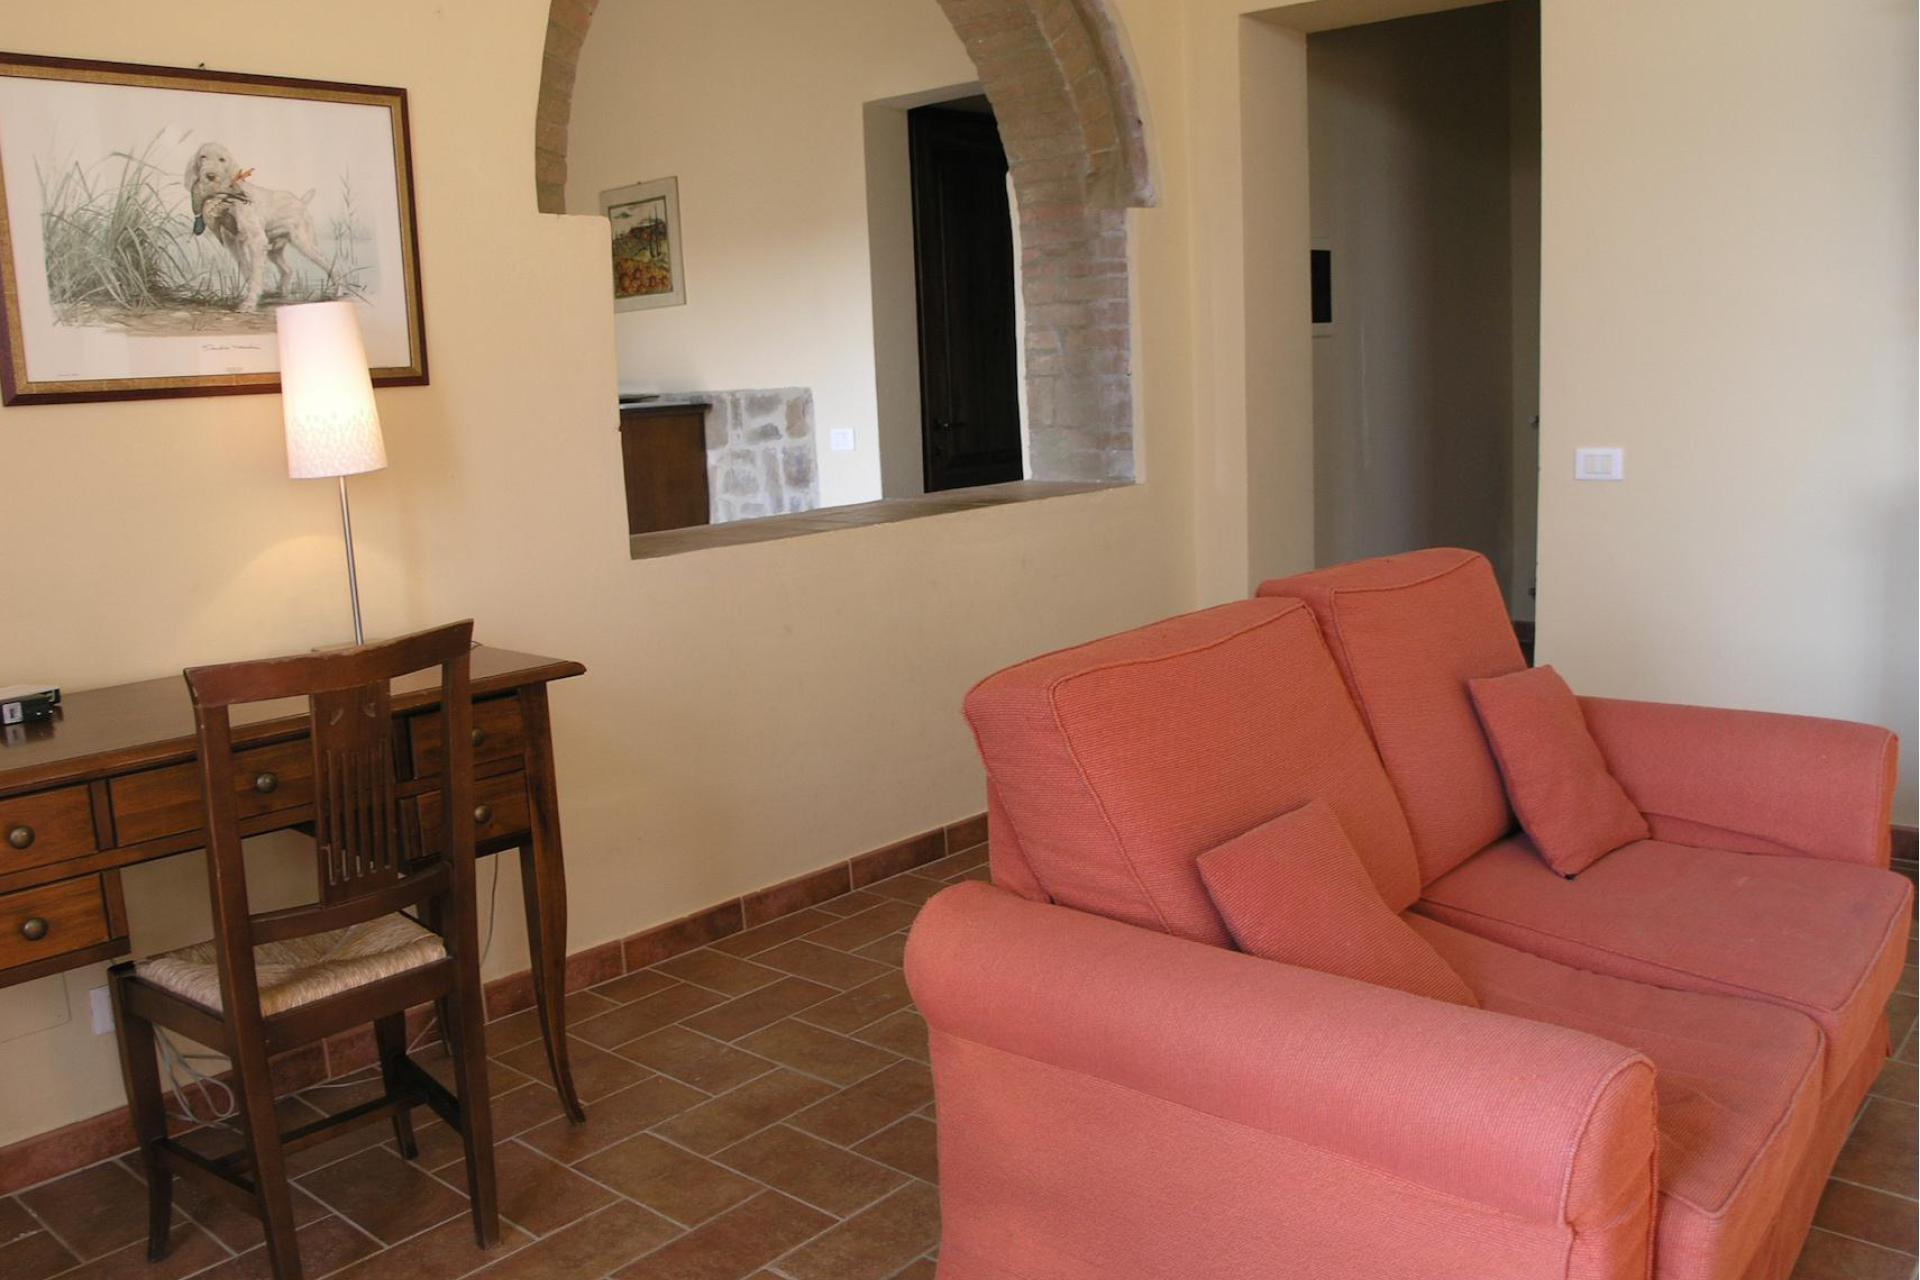 Agriturismo Tuscany Child-friendly agriturismo centrally located in Tuscany